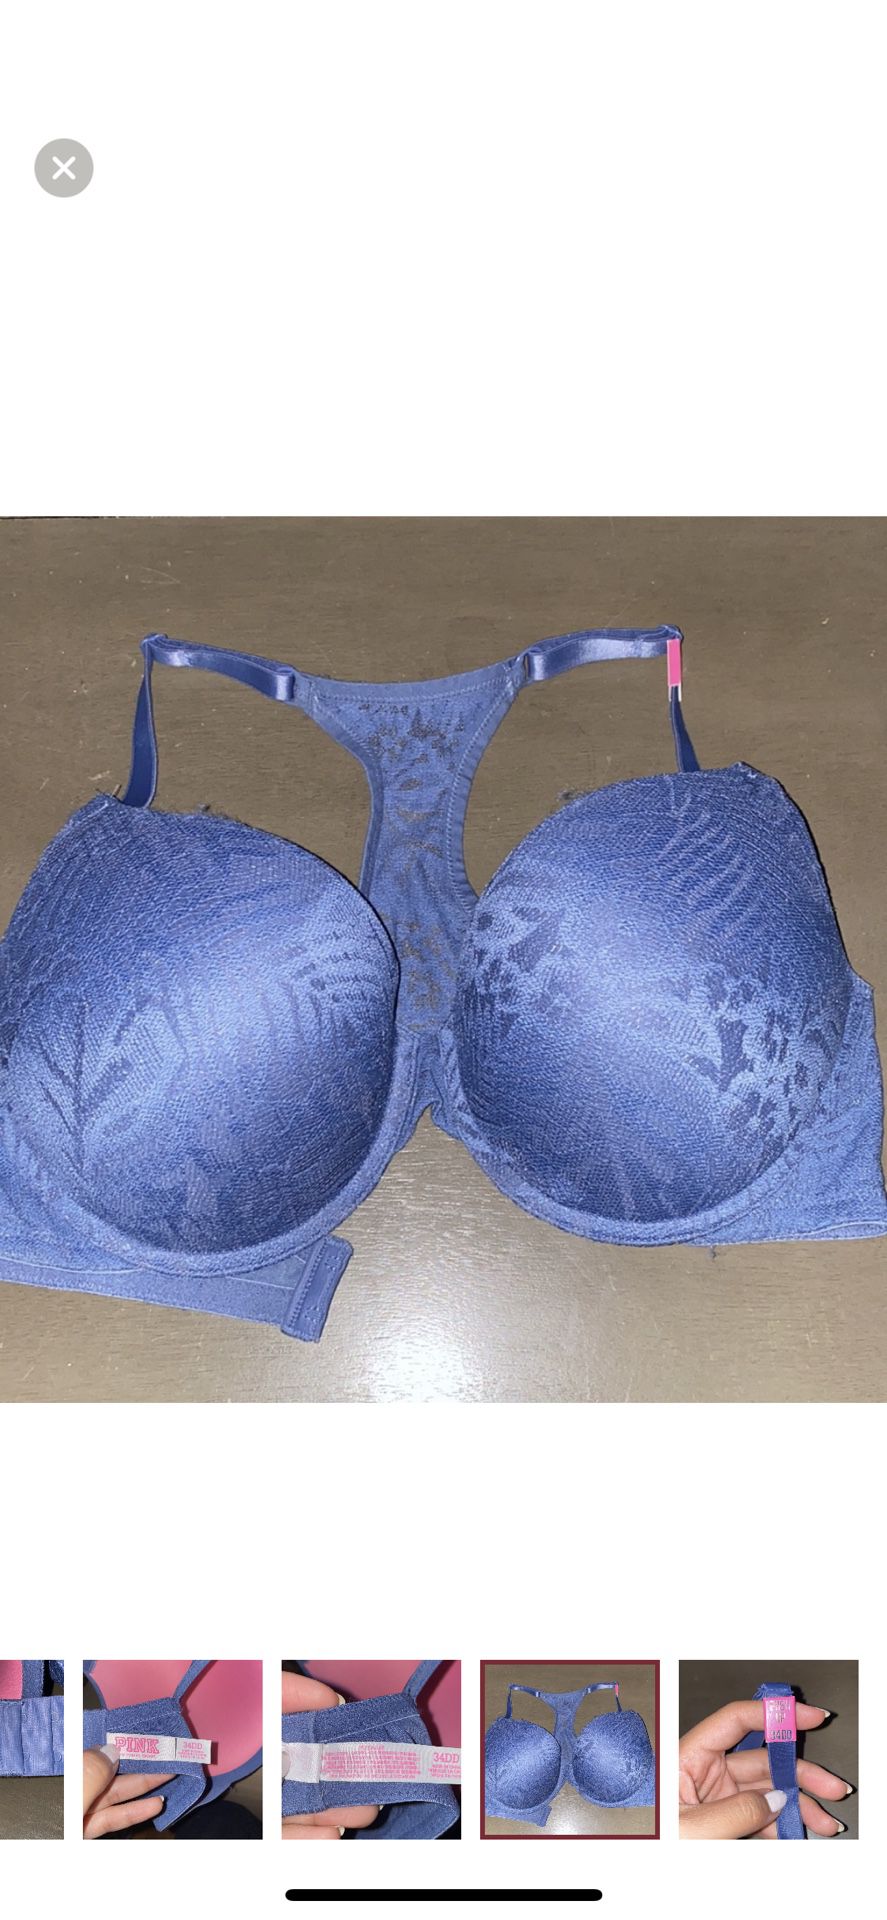 VS PINK Double/Super Push Up 34b Bra (Bombshell Padding) for Sale in Fair  Oaks, CA - OfferUp